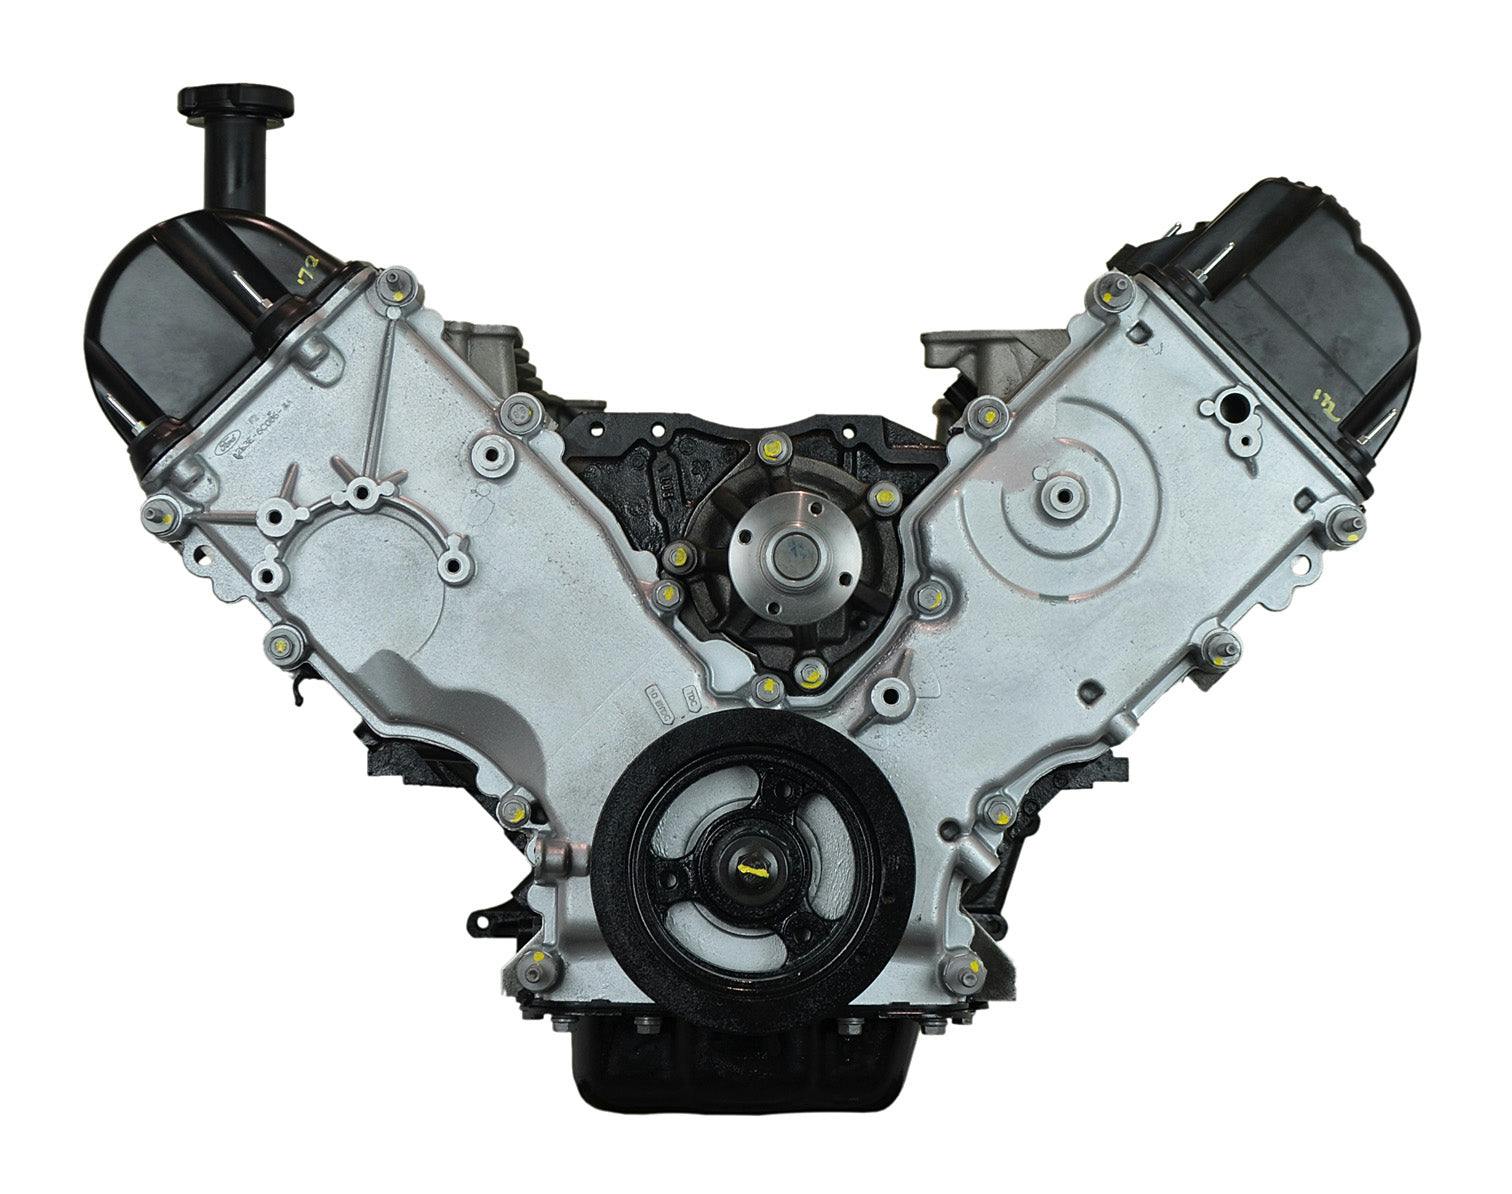 6.8L V10 Engine for 2004-2005 Ford ExcursionF-250, 350, 450, 550 Super Duty/F-53 Motorhome Chassis